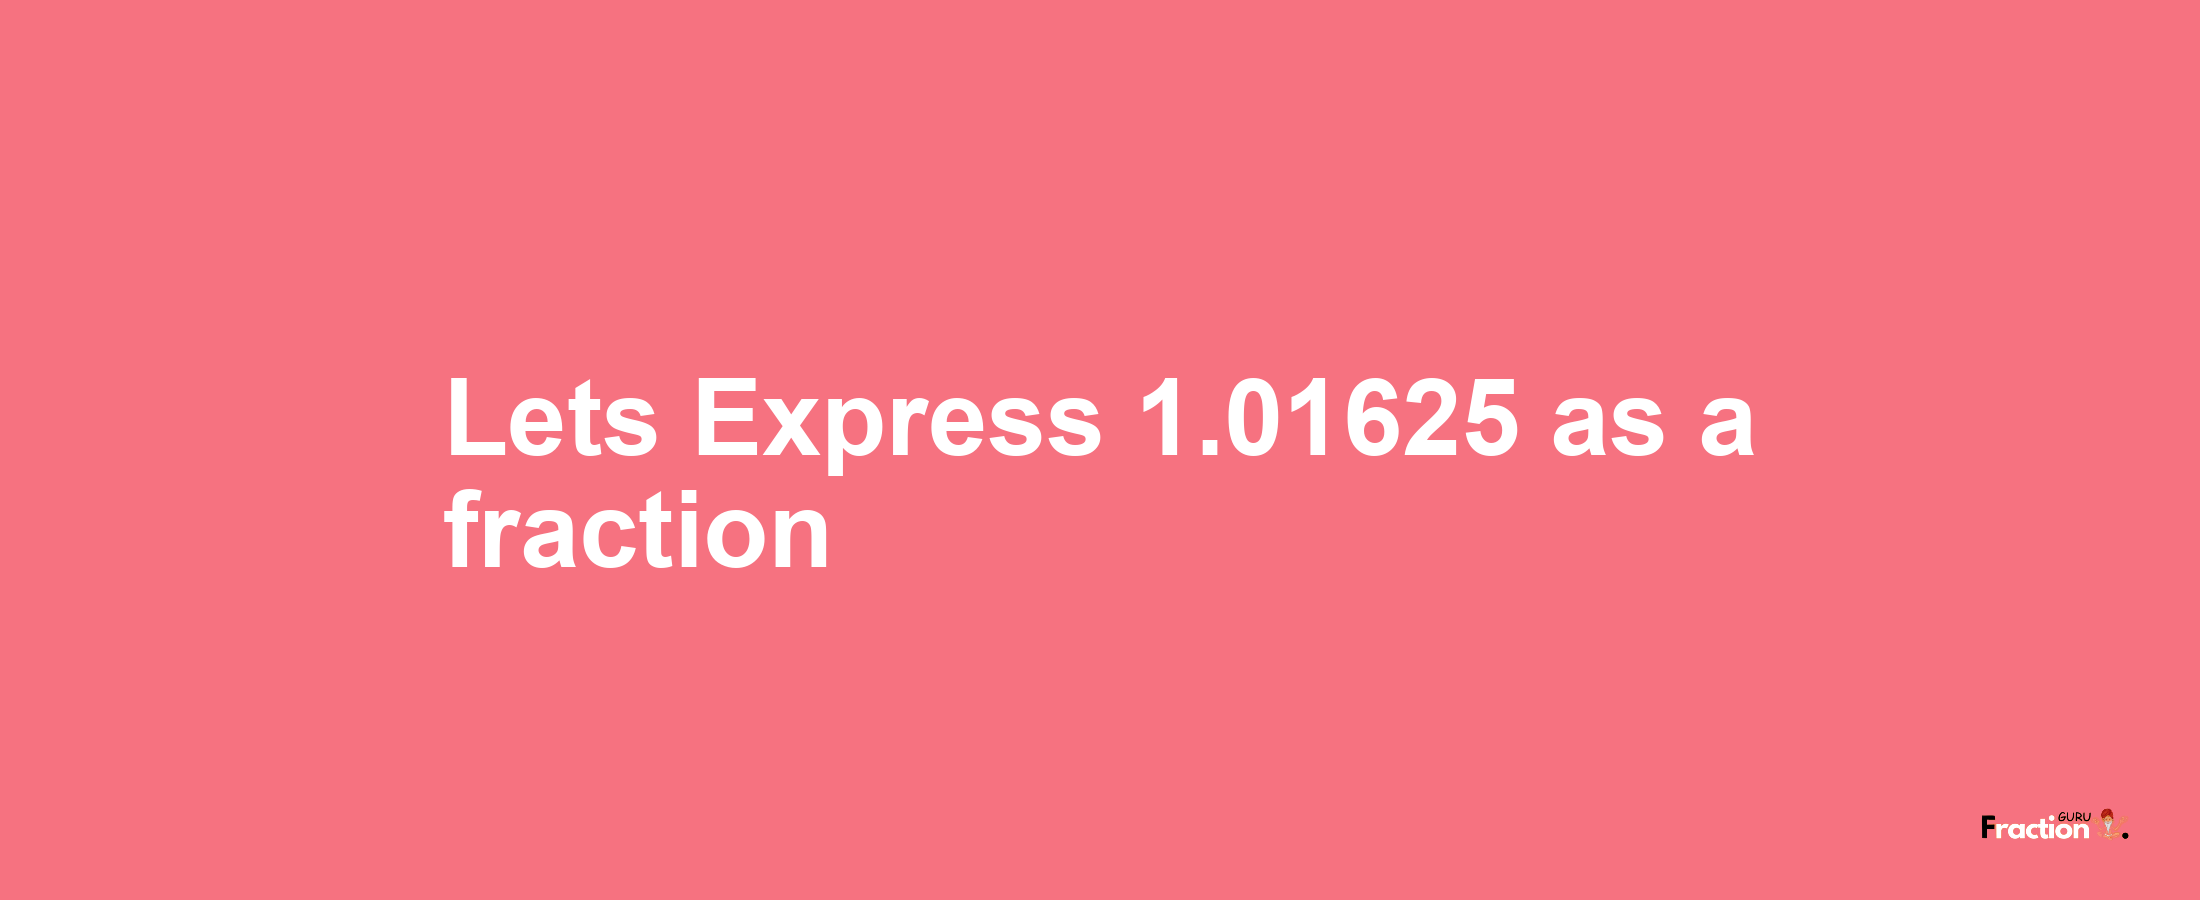 Lets Express 1.01625 as afraction